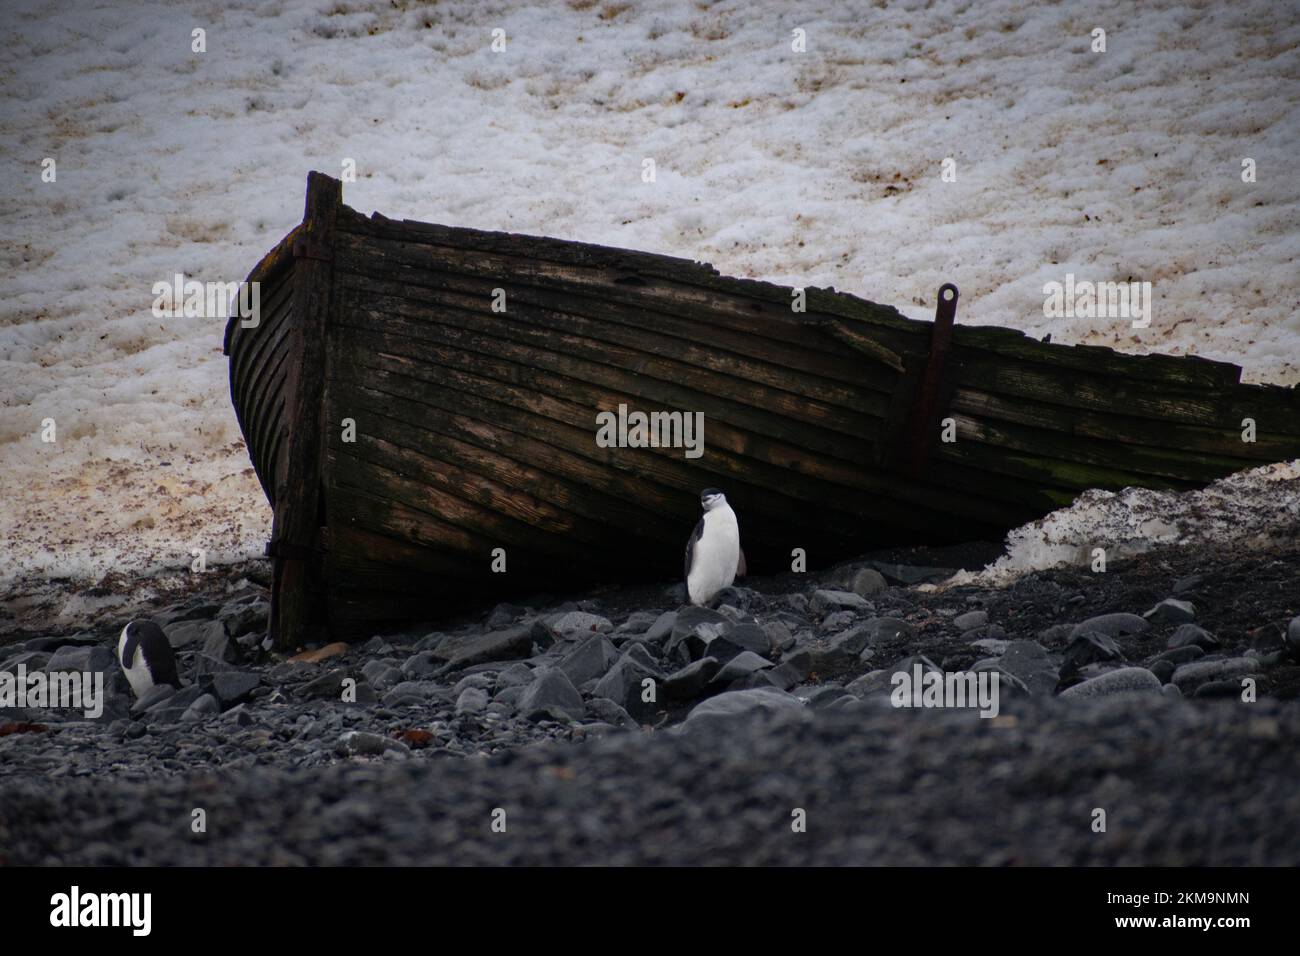 Chinstrap Penguin standing near an old wood whaling boat.  On deception island during spring in Antarctica. Stock Photo